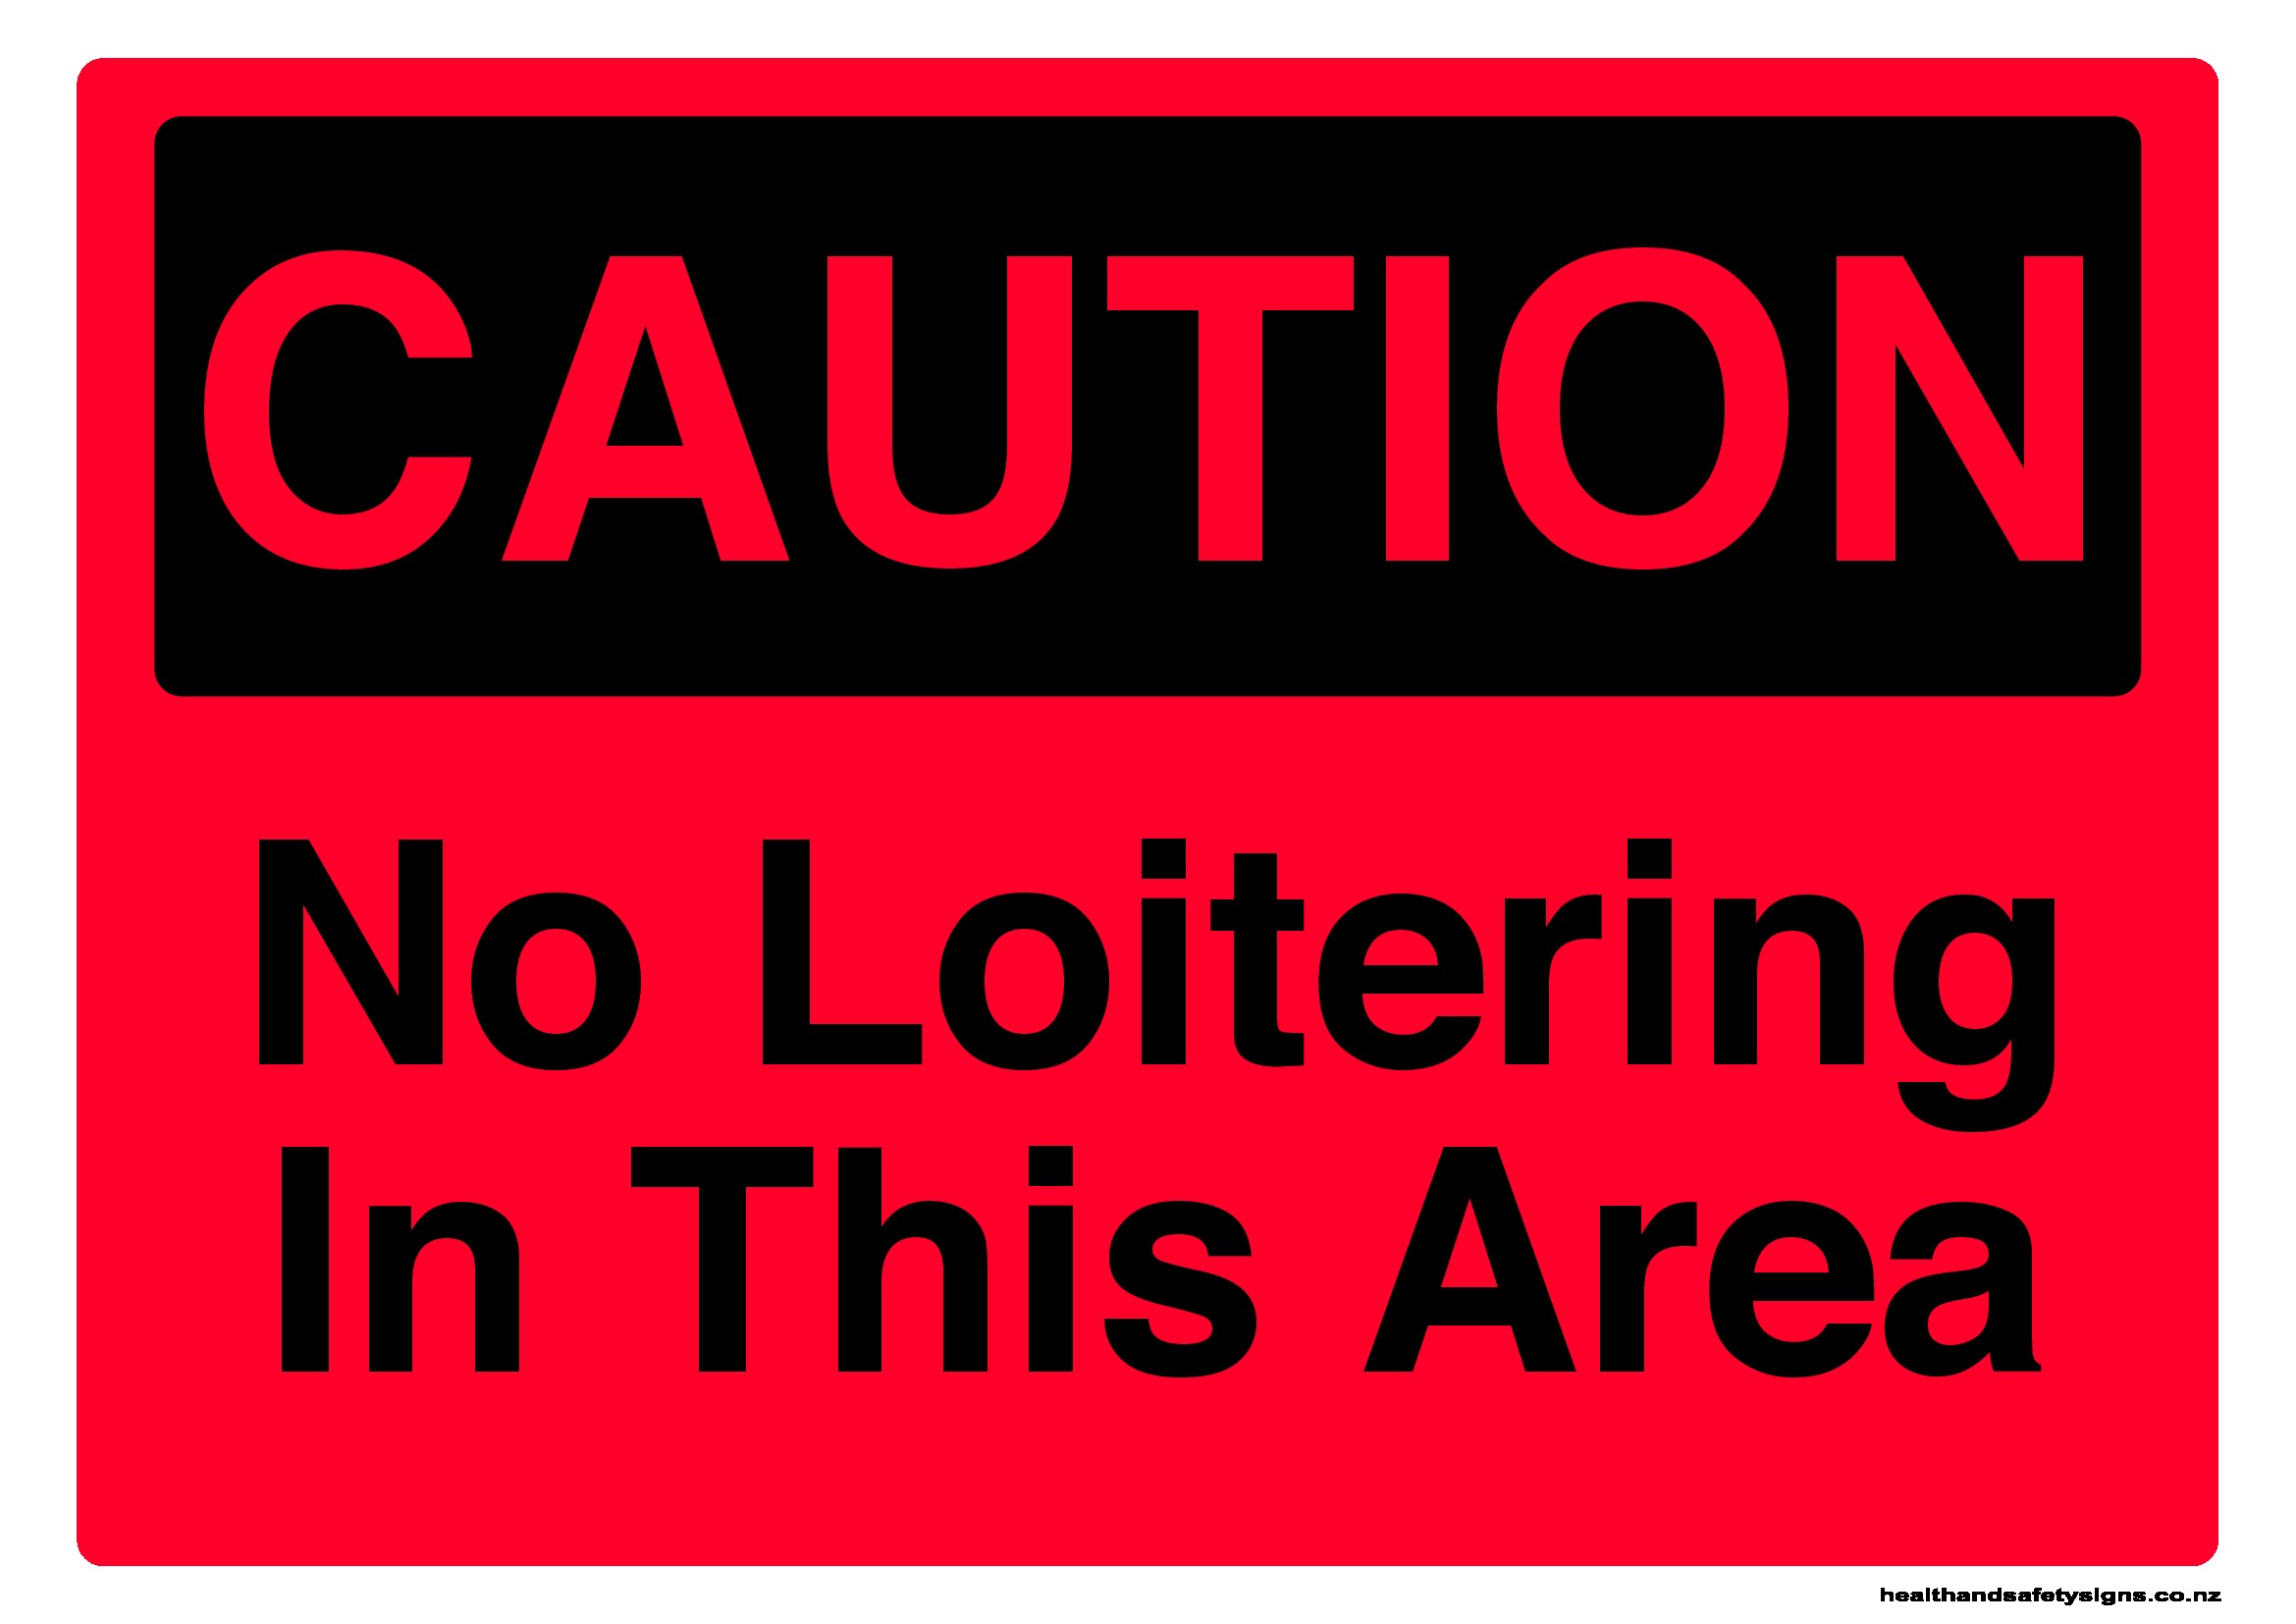 no-loitering-in-this-area-caution-sign-health-and-safety-signs